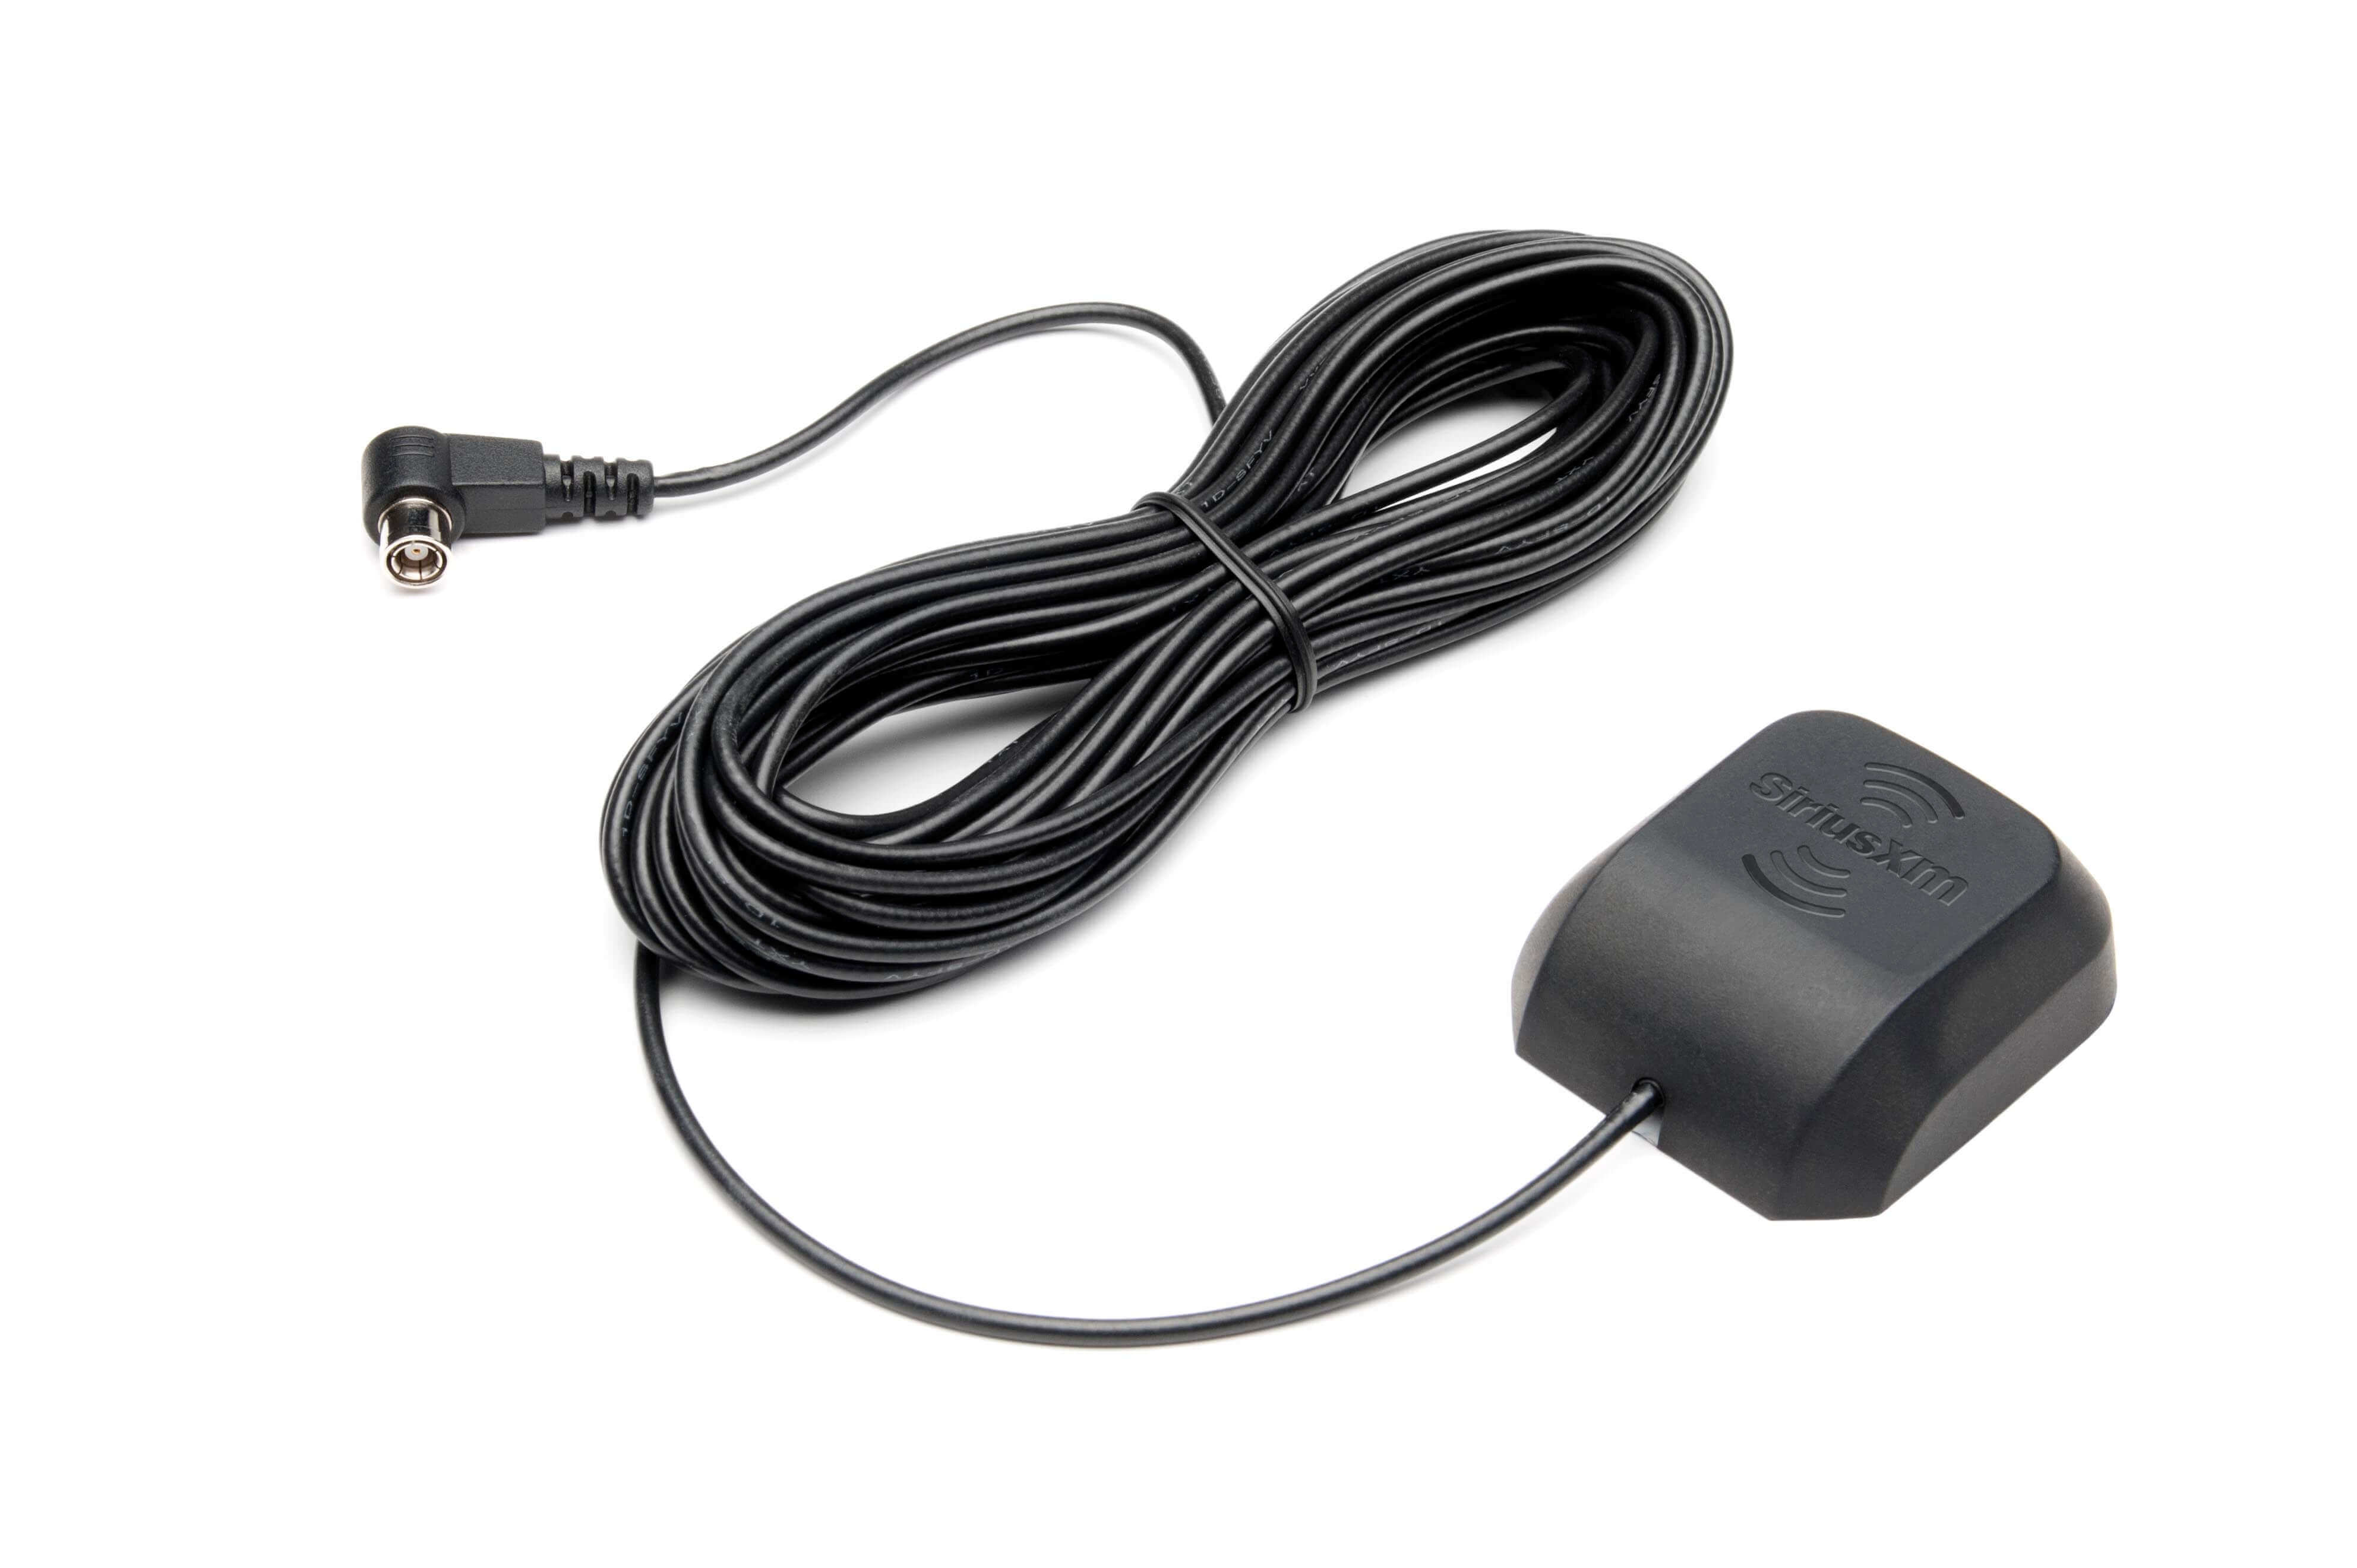 Magnetic antenna with 8 FT cable